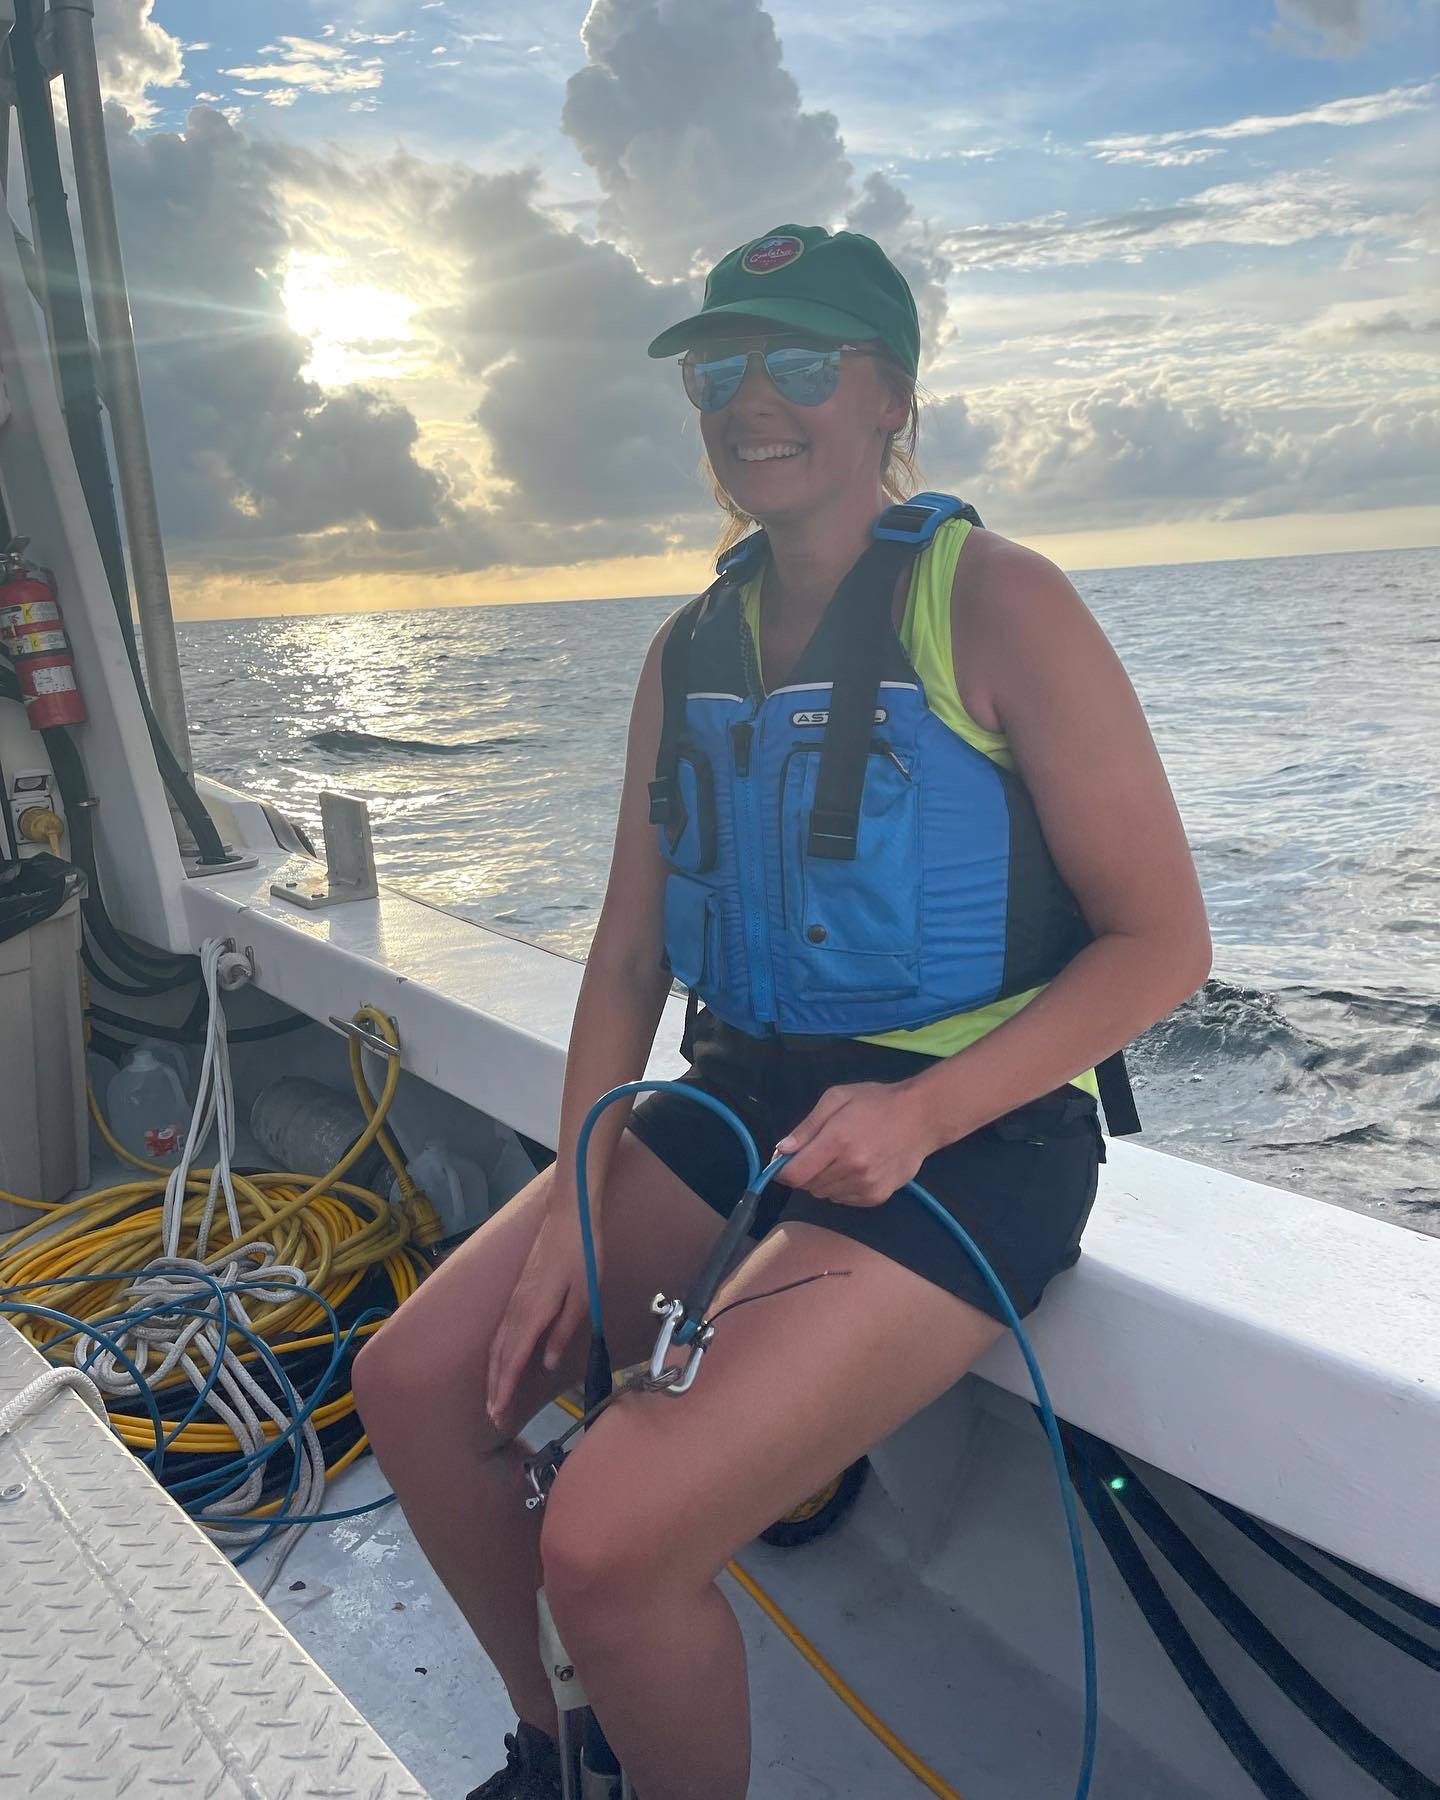 Masters student, Kendall Brome smiling while sitting on a boat for field work. She is holding a censor for the sound velocity profiler.